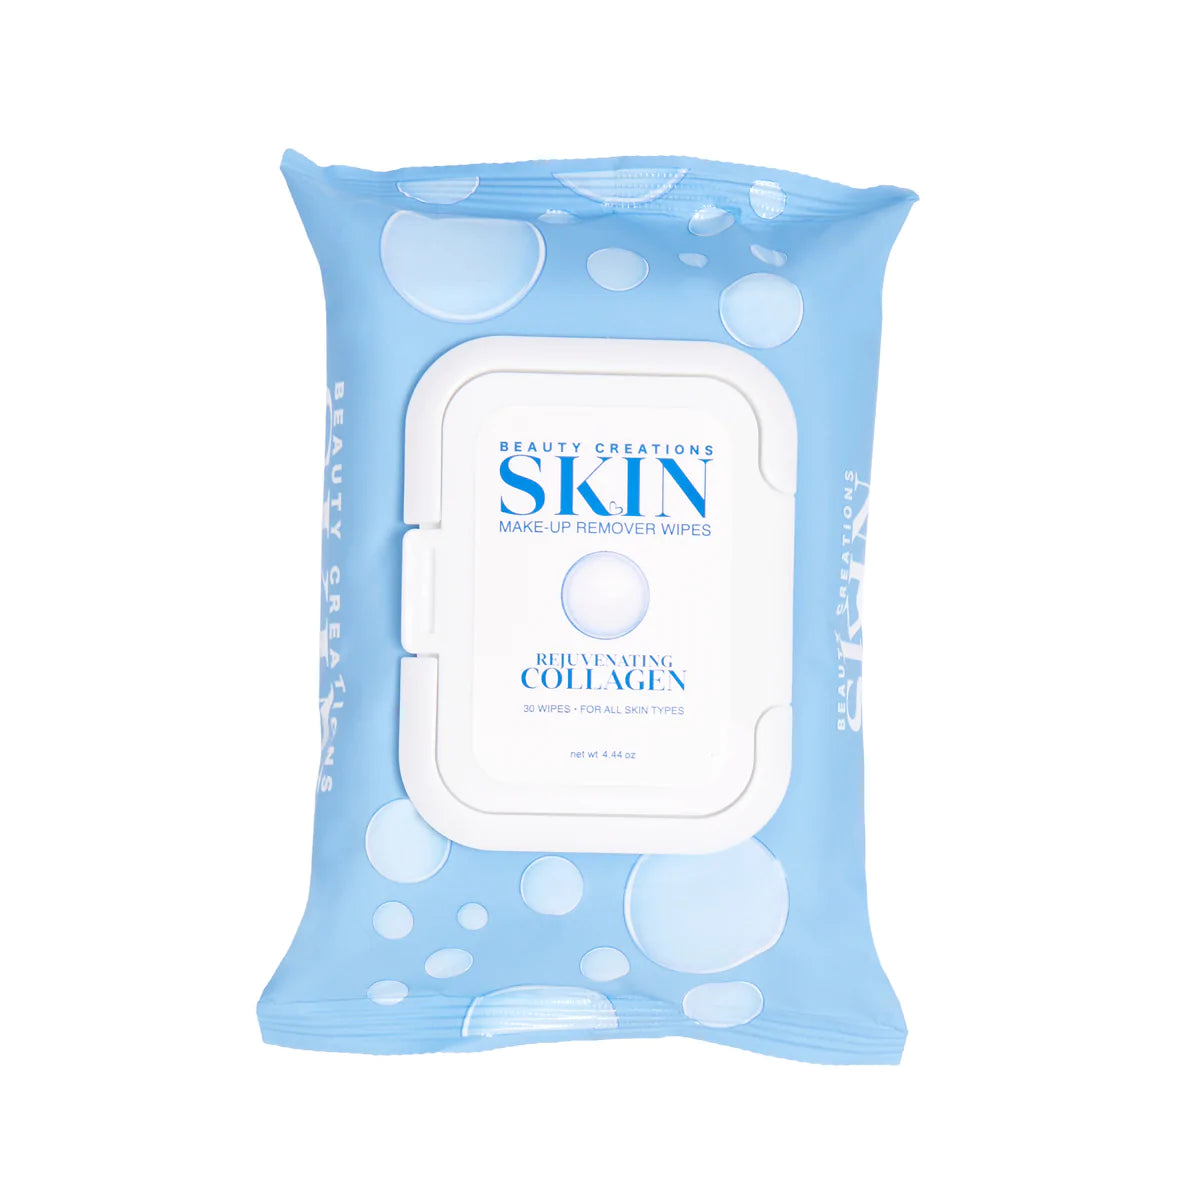 Beauty Creations - Collagen Rejuvenating Makeup Remover Wipes